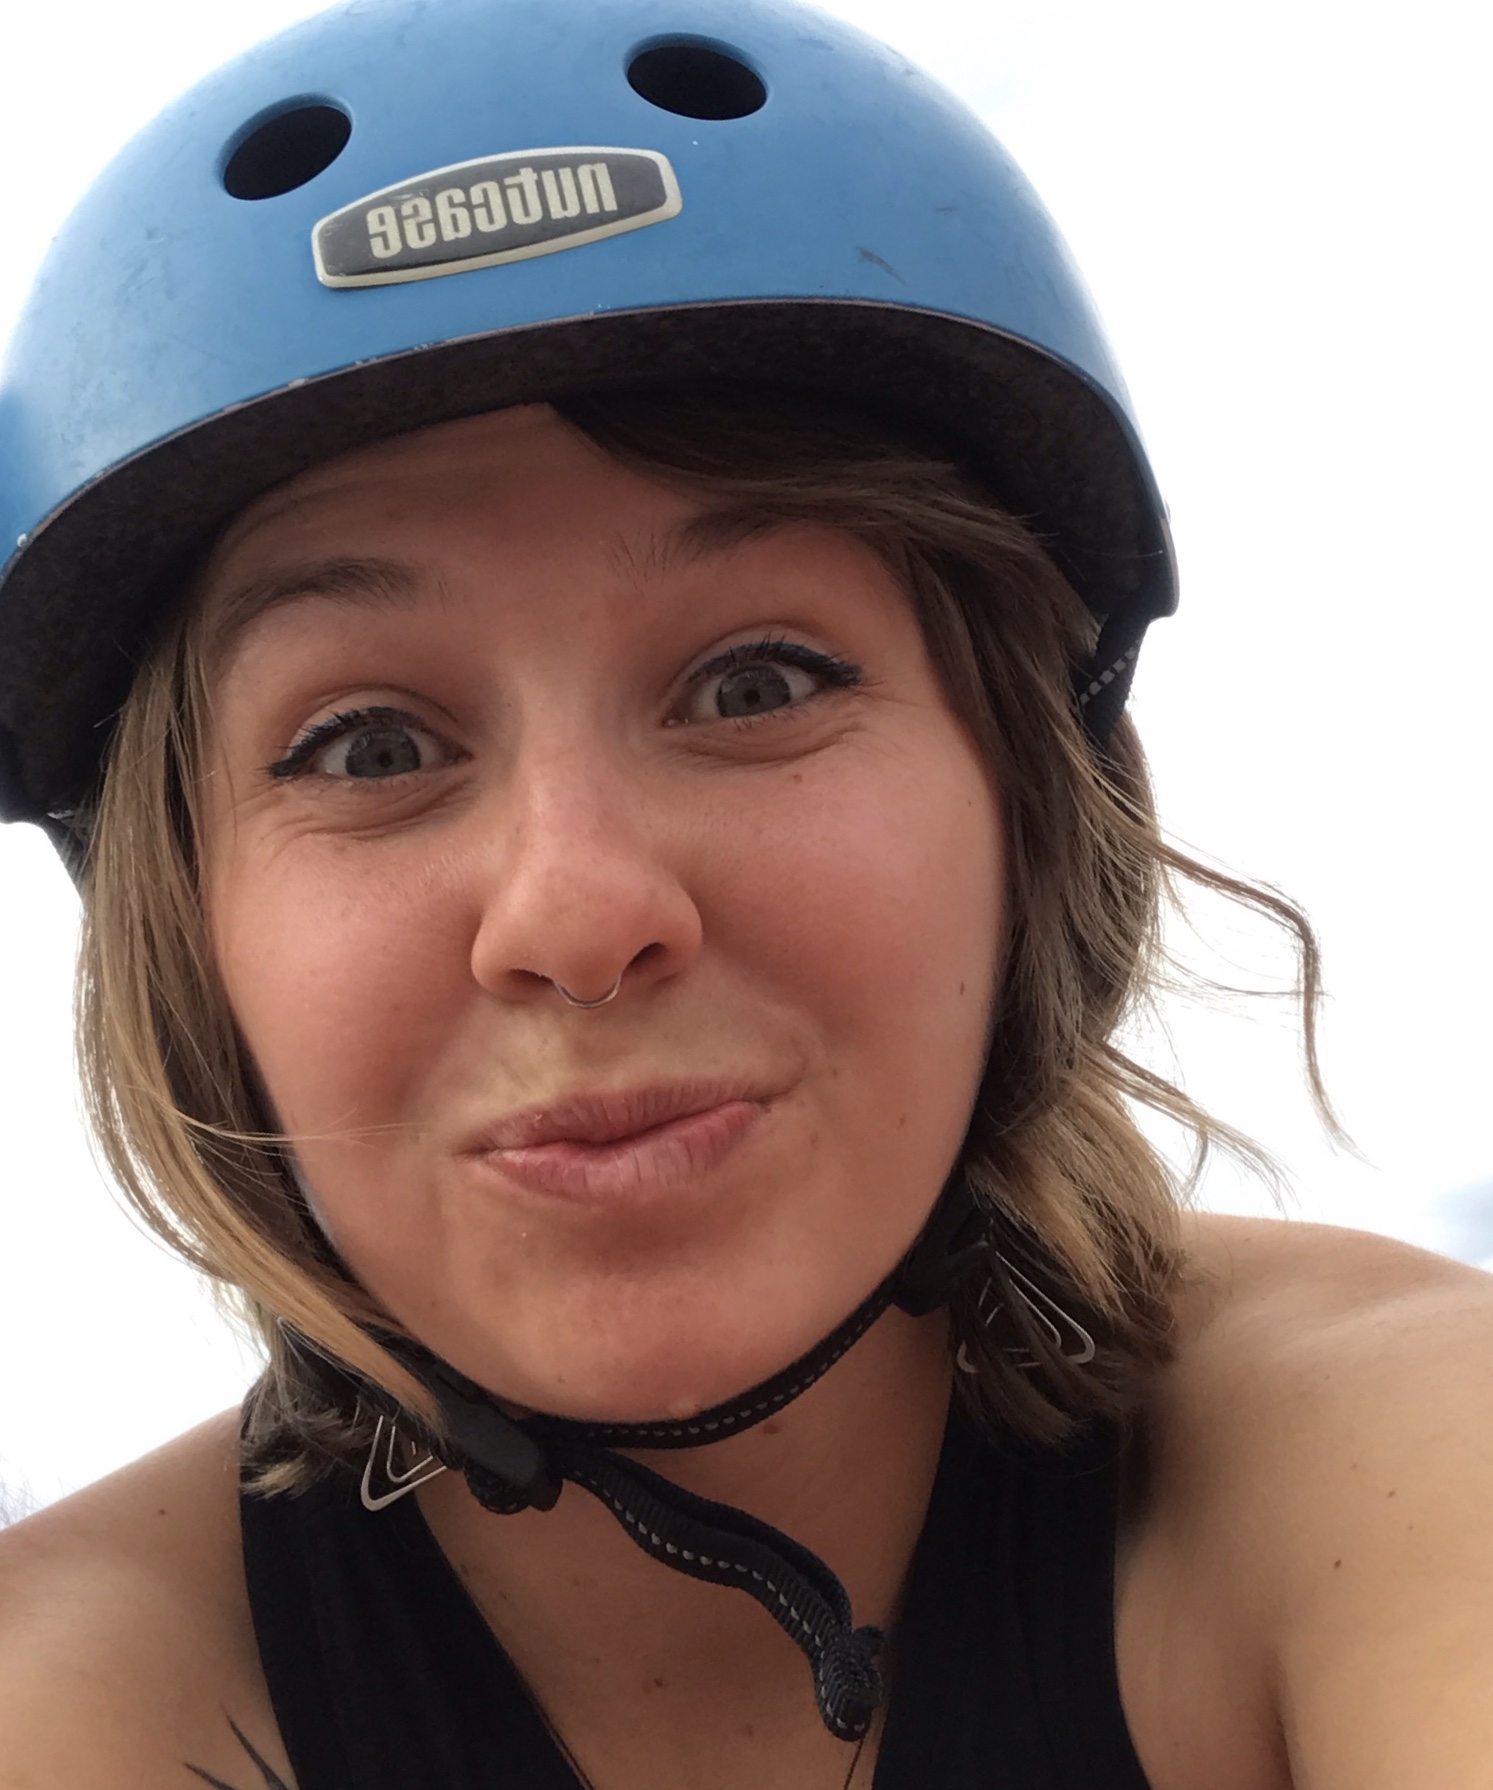 Maddie makes a silly face while wearing a blue helmet.